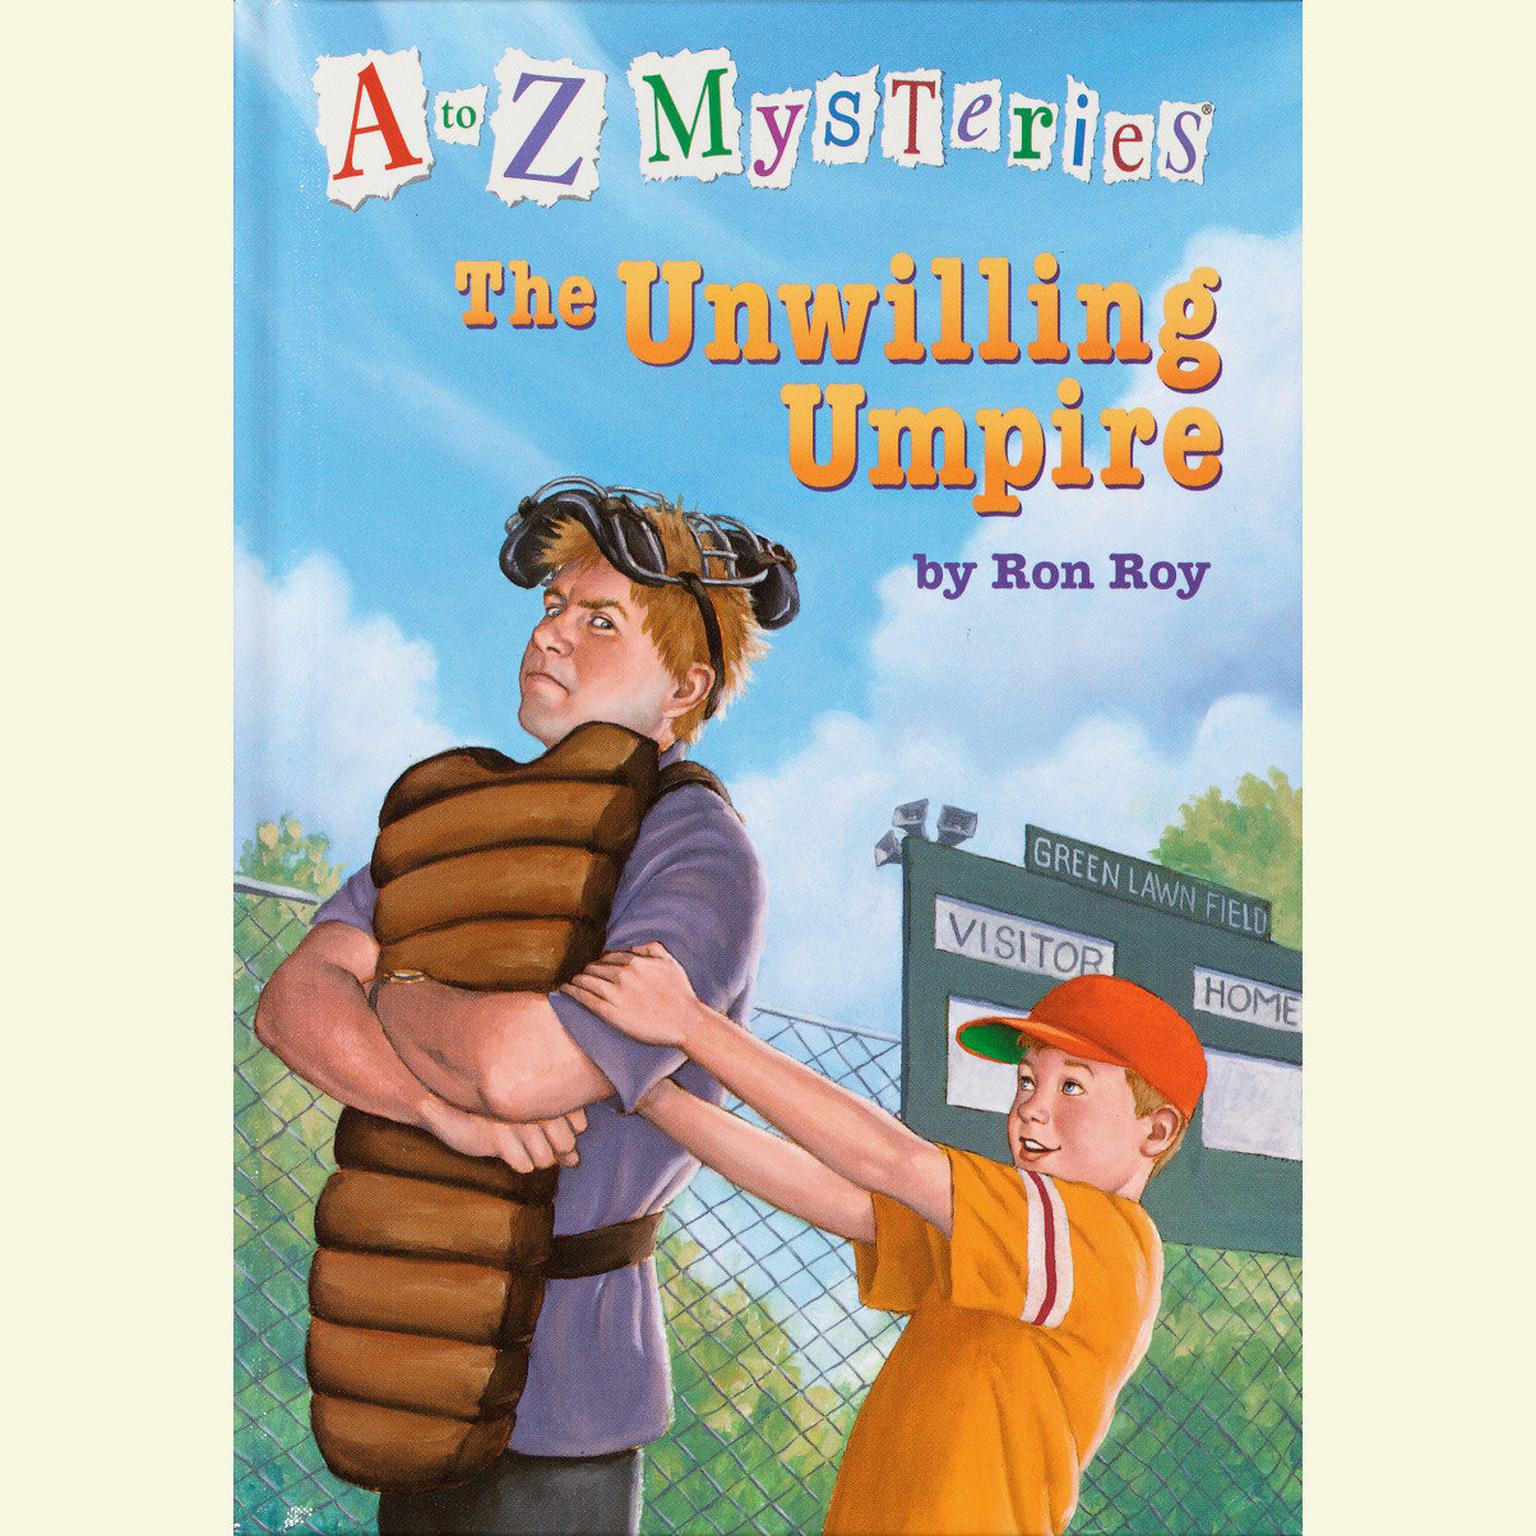 A to Z Mysteries: The Unwilling Umpire Audiobook, by Ron Roy